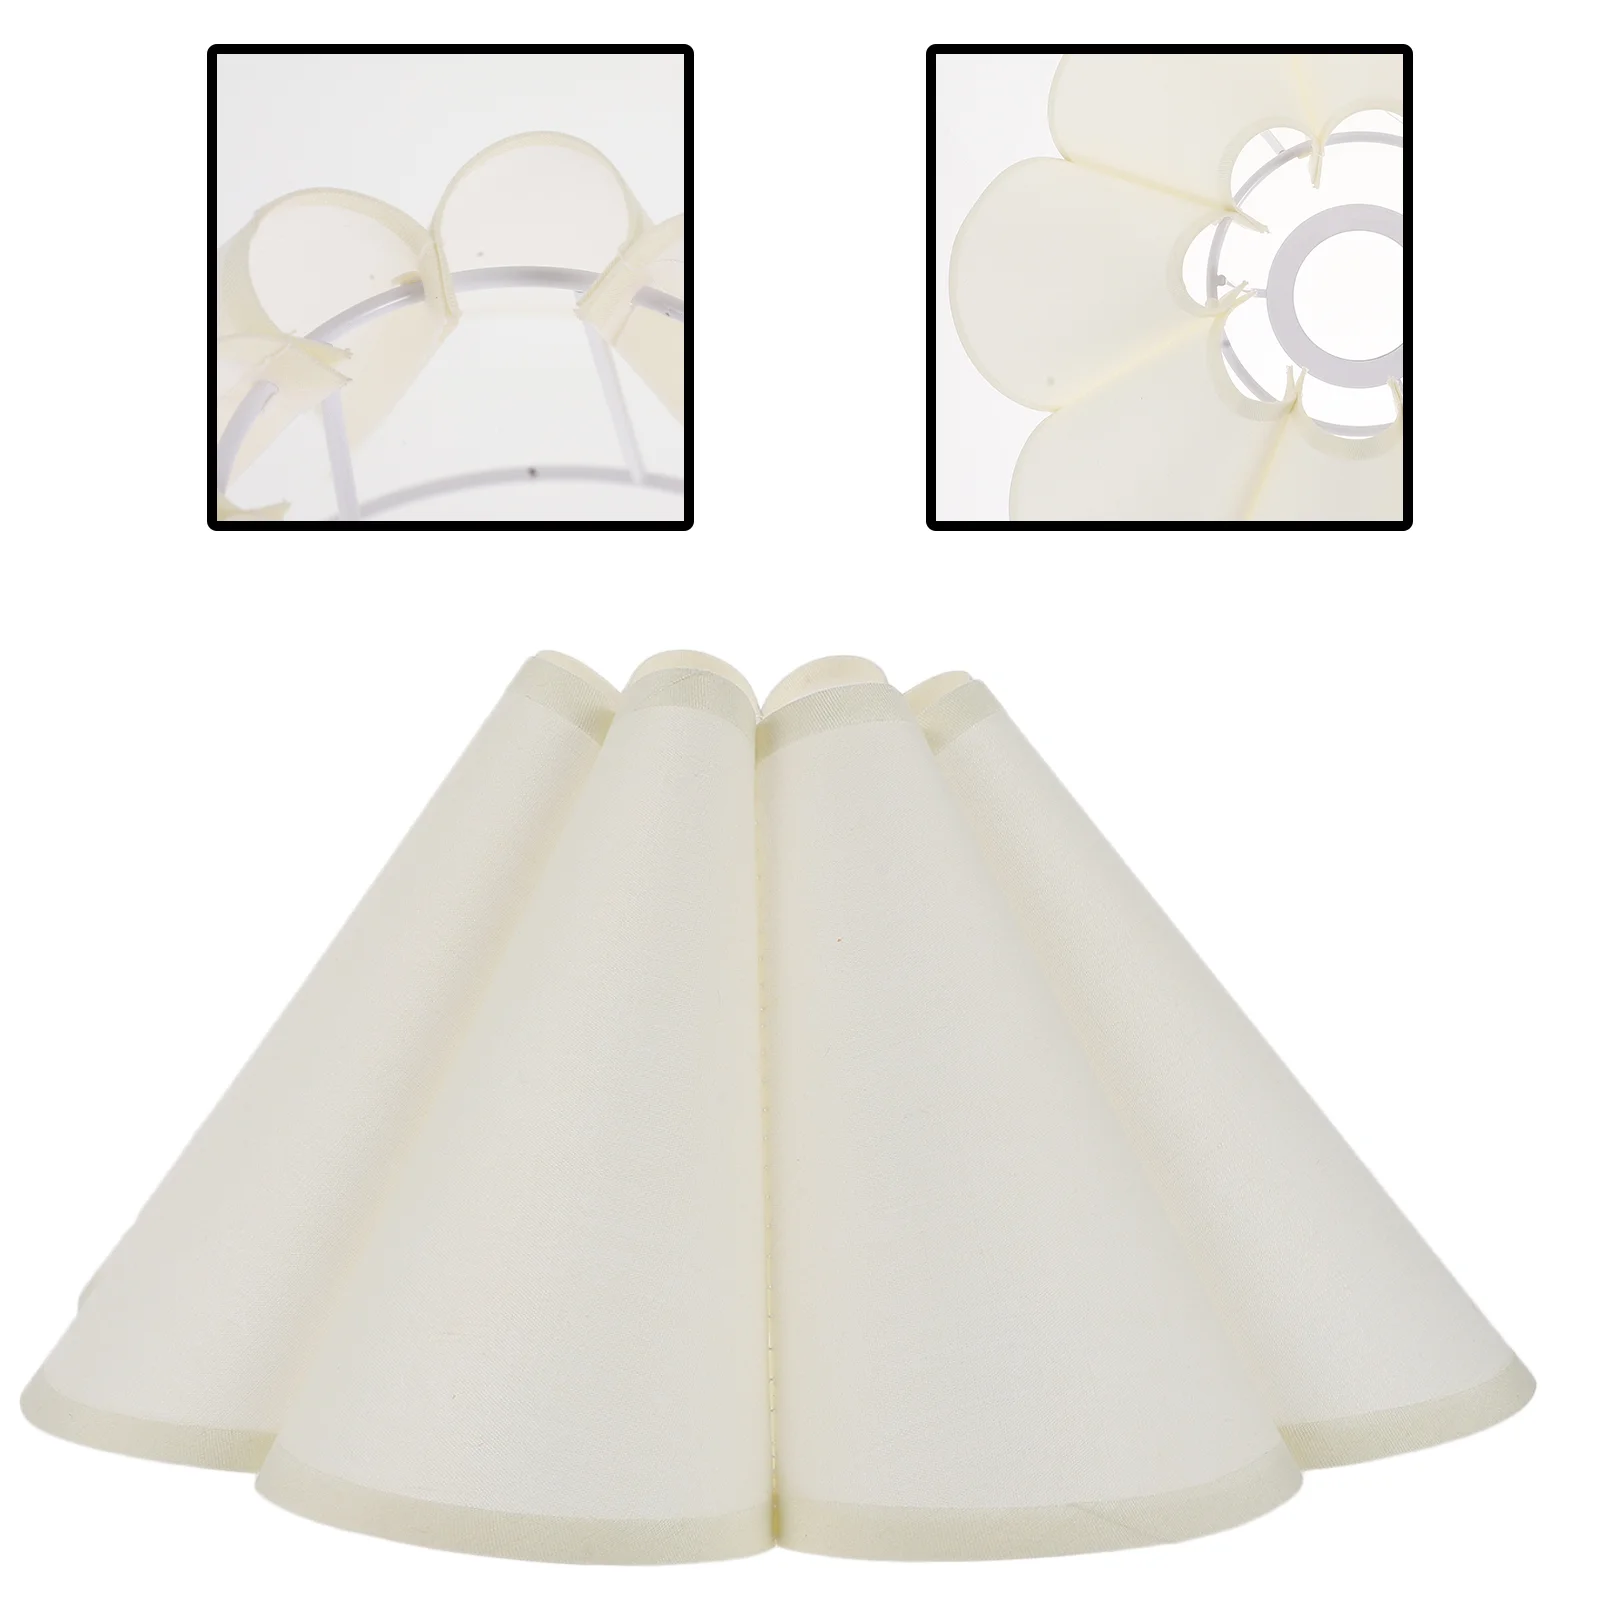 Protector Lamp Cover Vintage Table Lamp Light Shell Cover Chandelier Lamp Shades Petal Table Lamp Shade Pleated Drum Lamp Shade